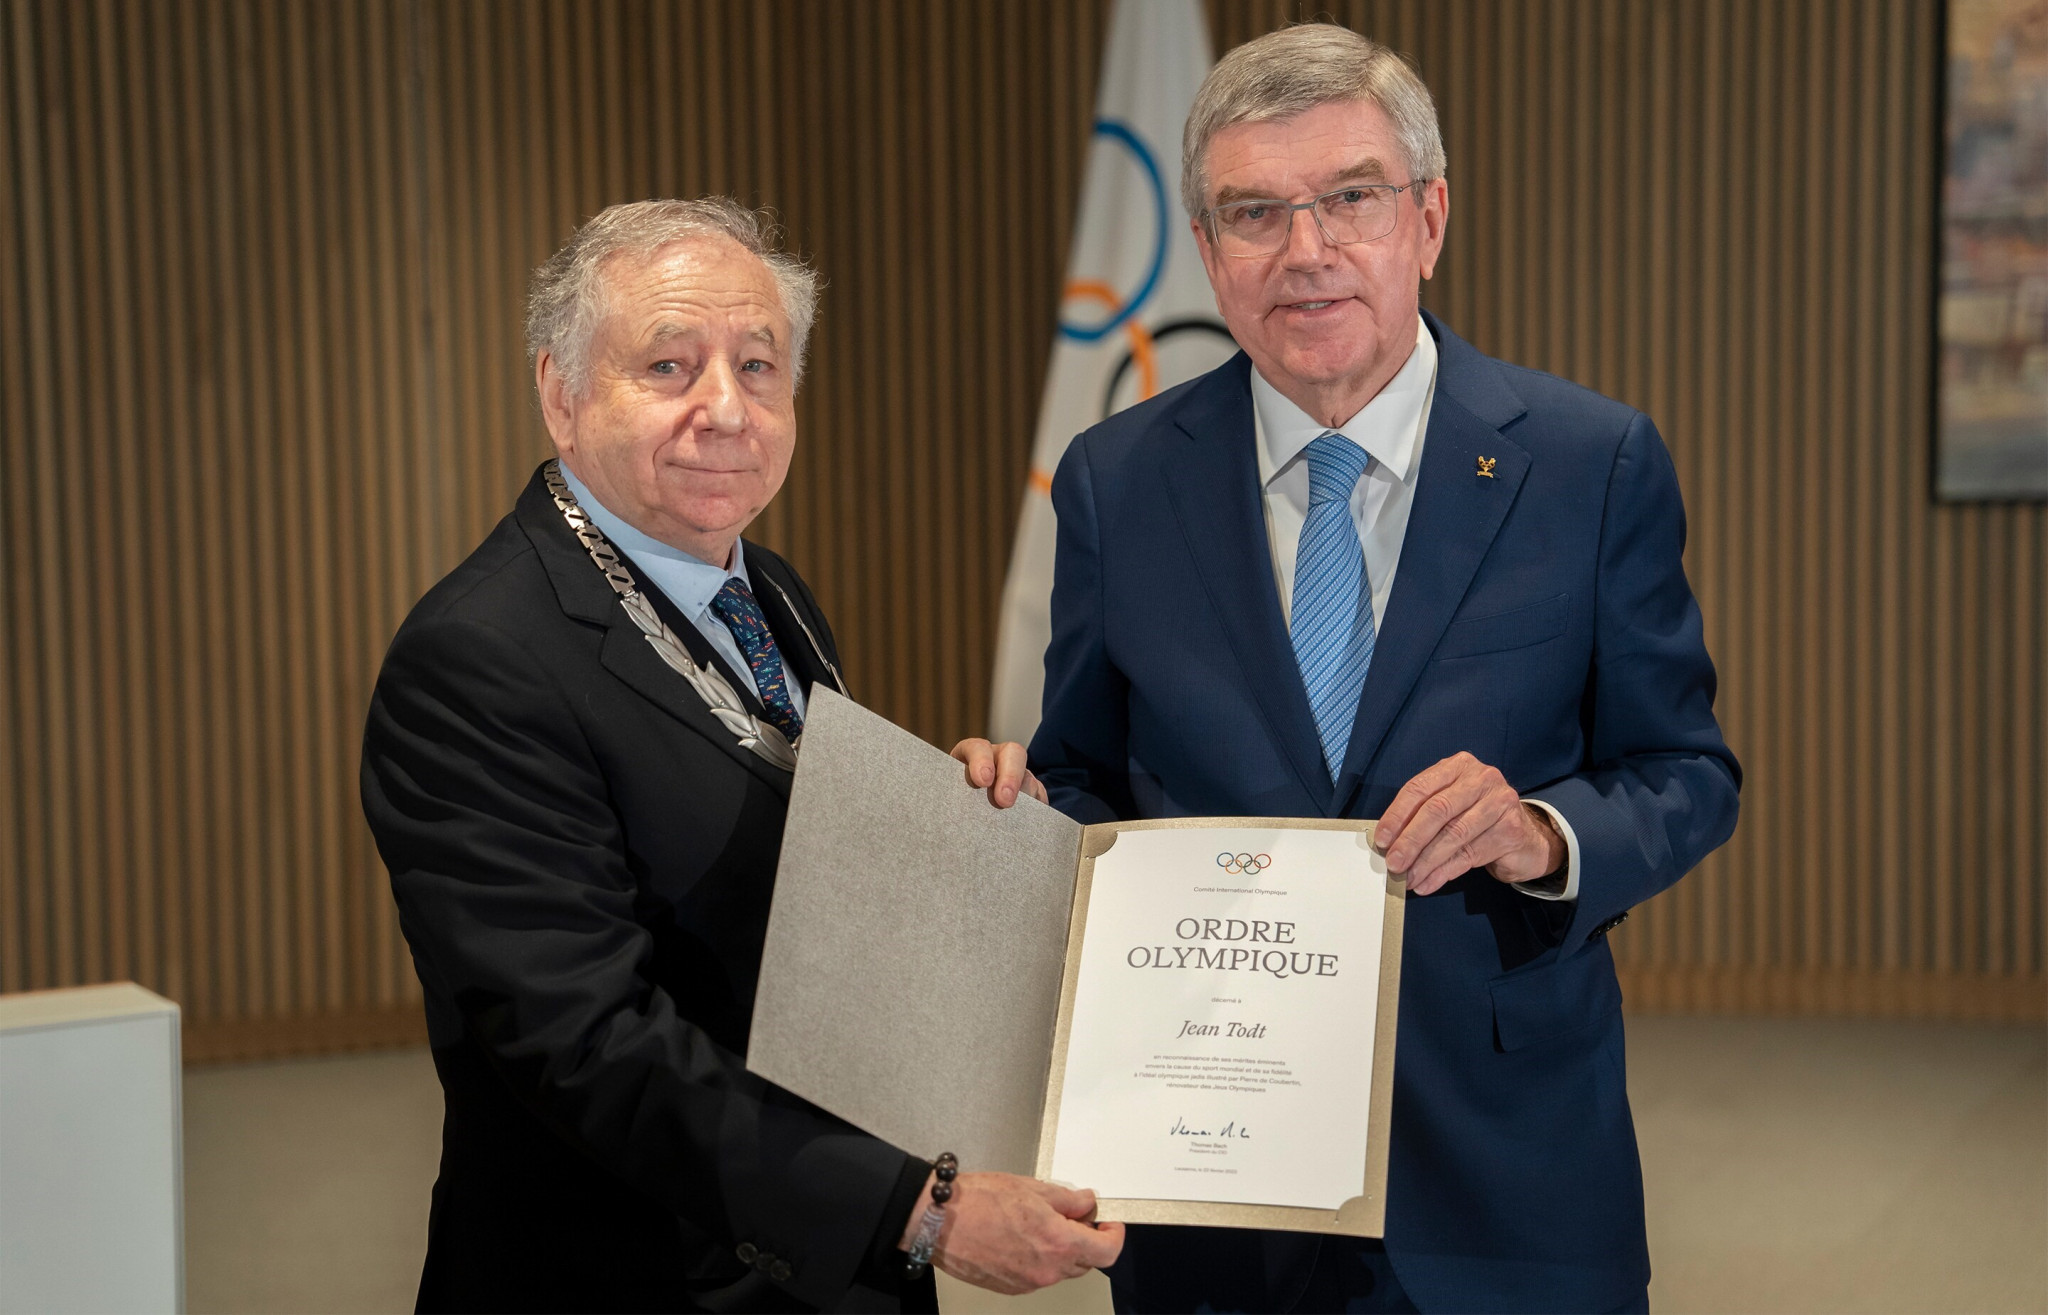 Honorary FIA President Todt receives Olympic Order from Bach